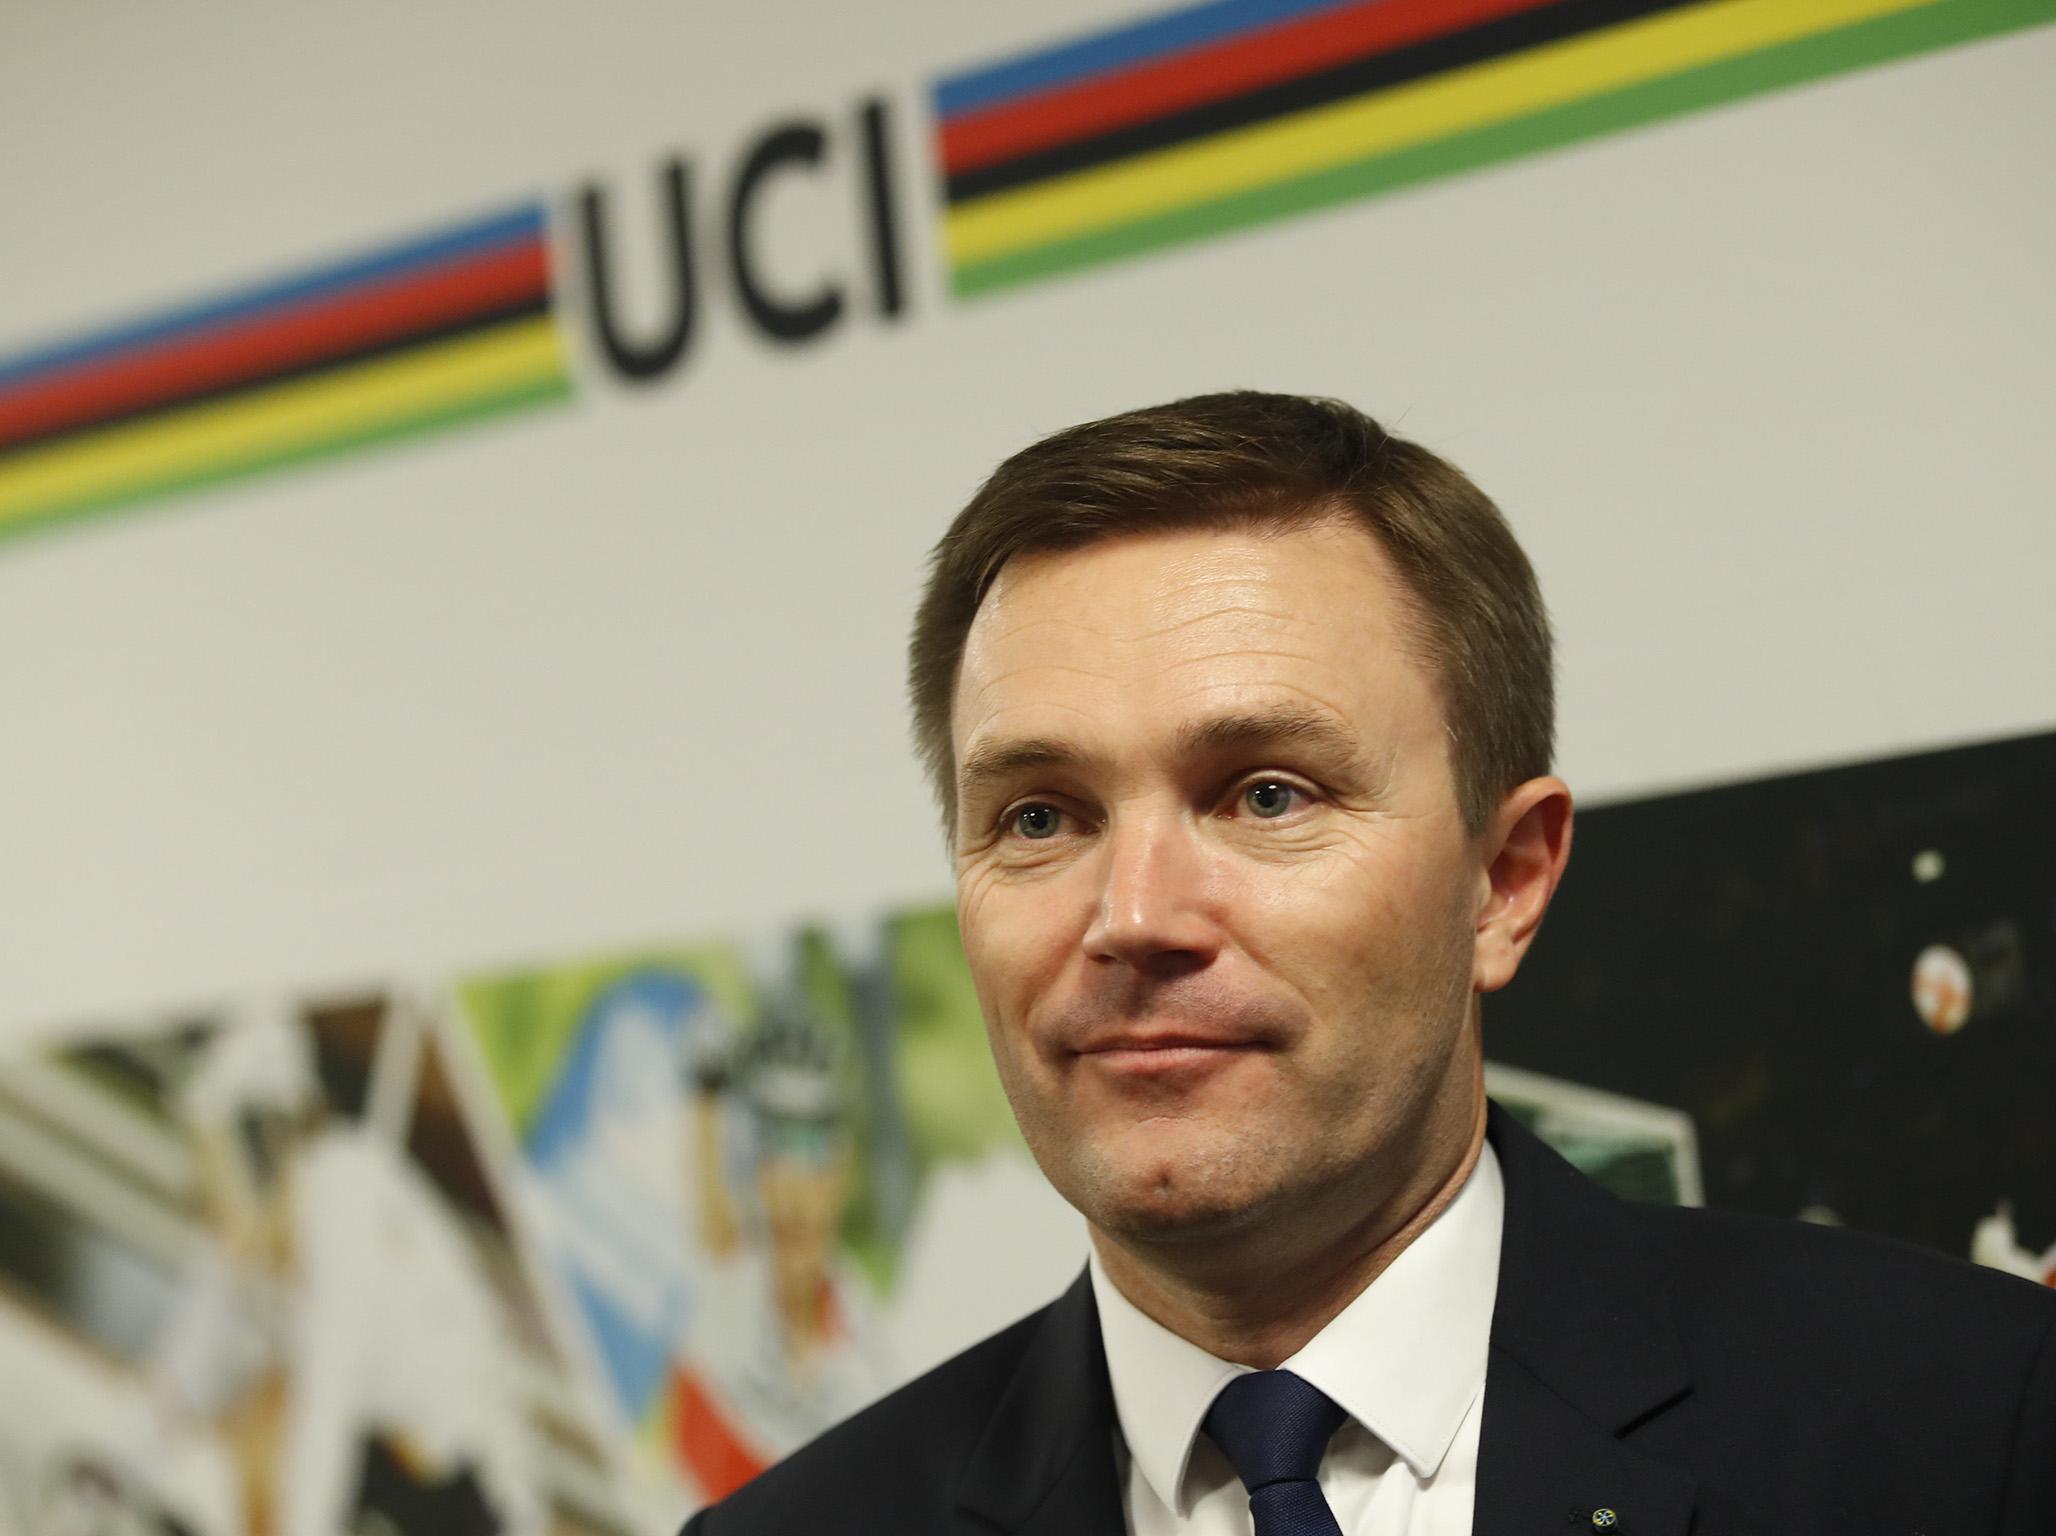 The UCI president has called for Team Sky to be investigated